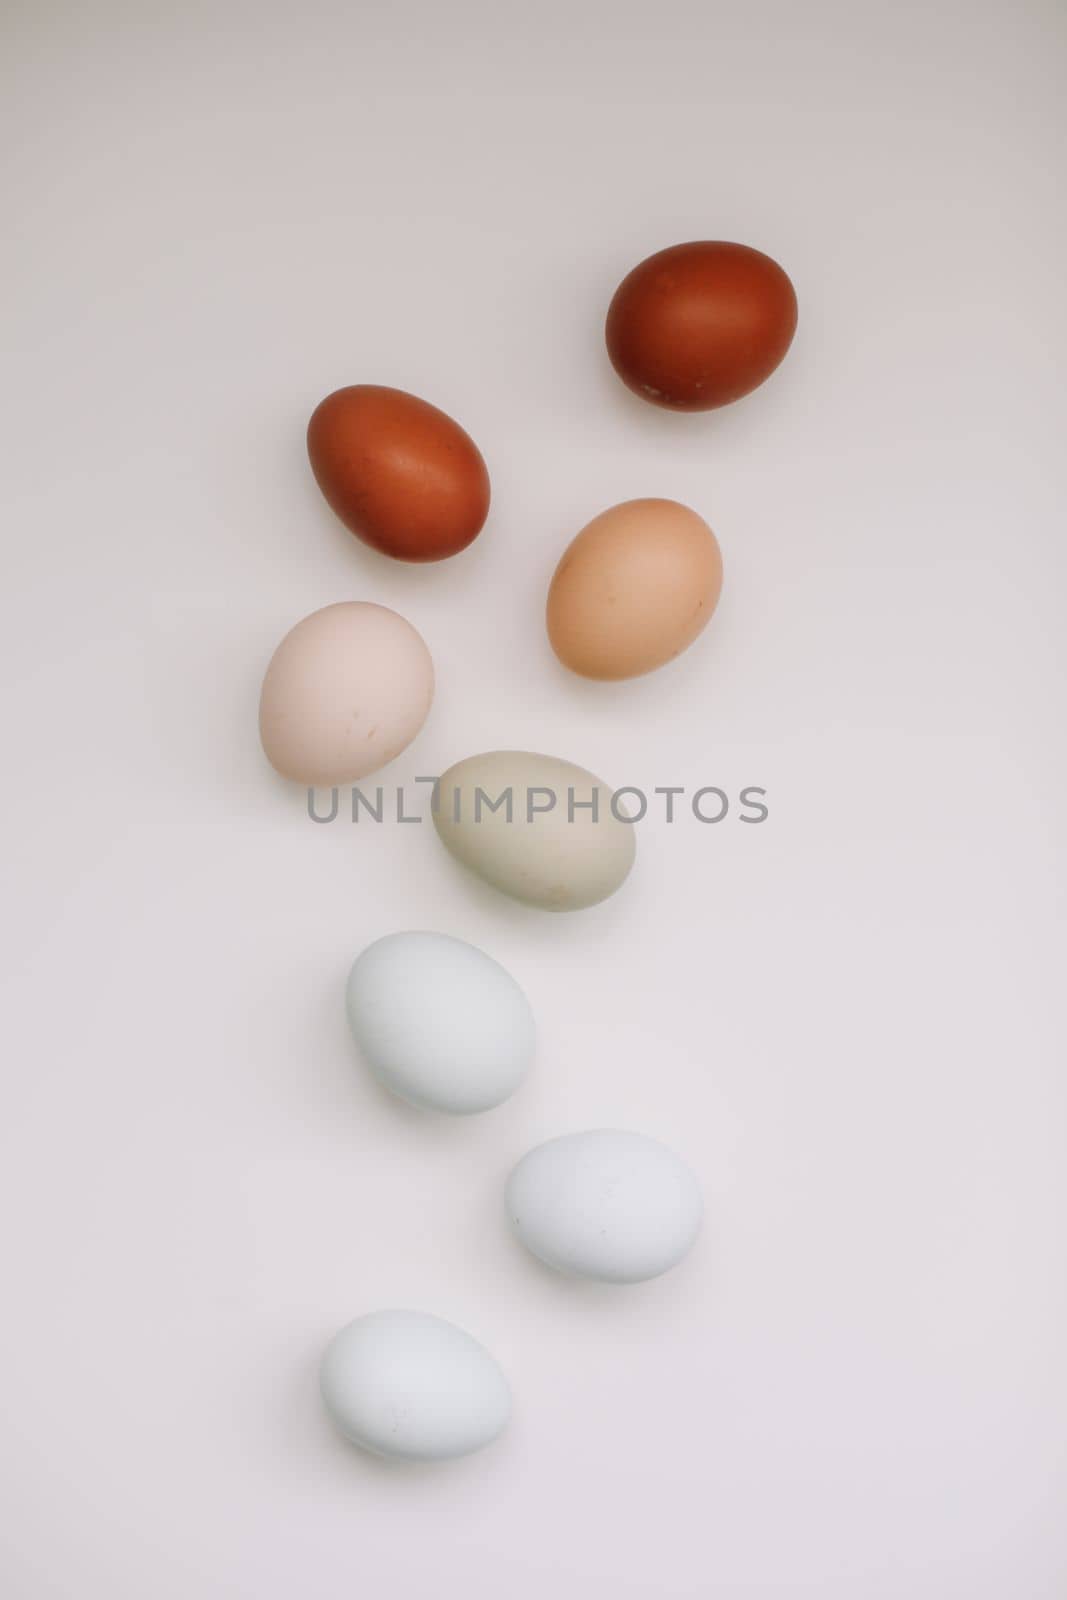 Chicken eggs of natural shades and colors a white background. Healthy organic food, natural farmer's products concept. Happy Easter background. Selective focus.